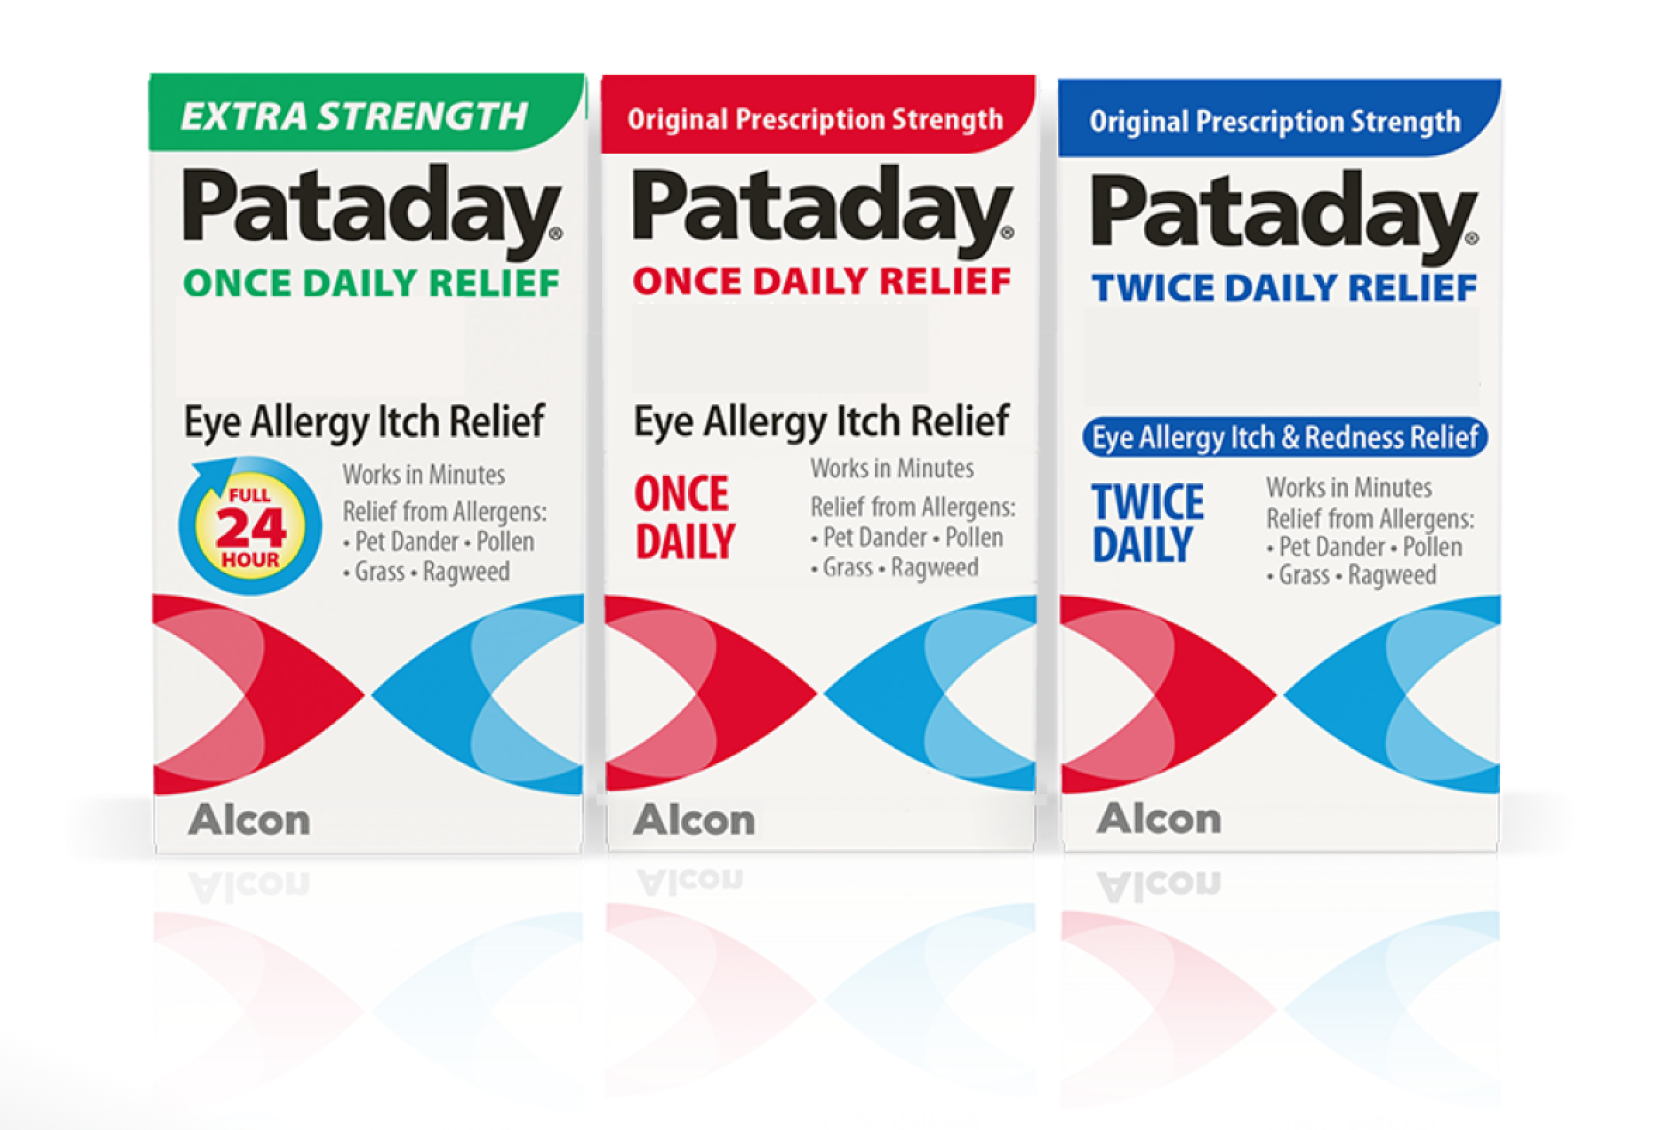 product boxes for Pataday Eye Allergy Itch Relief Eye Drops in Once Daily Relief Extra Strength, Once Daily Relief Originial Prescription Strength, and Twice Daily Relief Original Prescription Stregnth